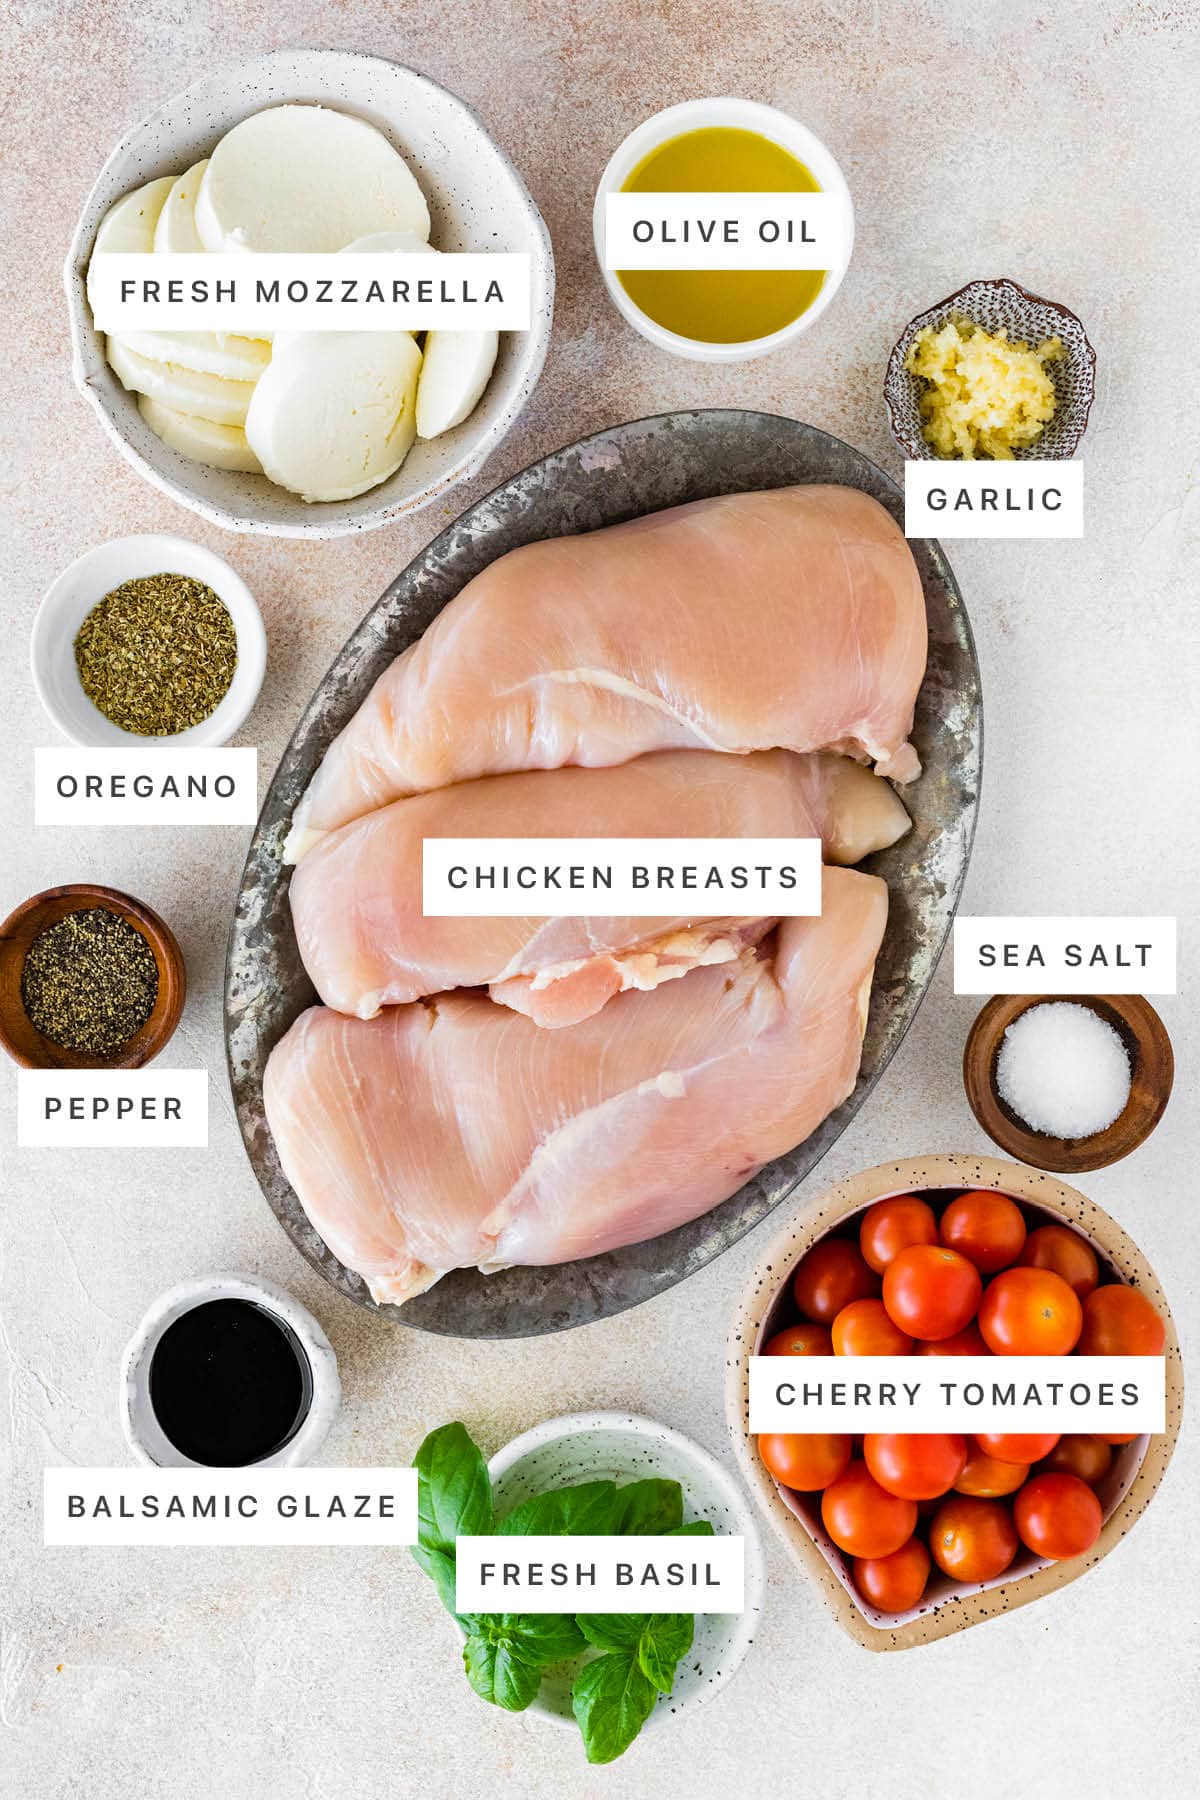 Ingredients measured out to make Baked Caprese Chicken: fresh mozzarella, olive oil, garlic, oregano, chicken breasts, pepper, sea salt, balsamic glaze, fresh basil and cherry tomatoes.